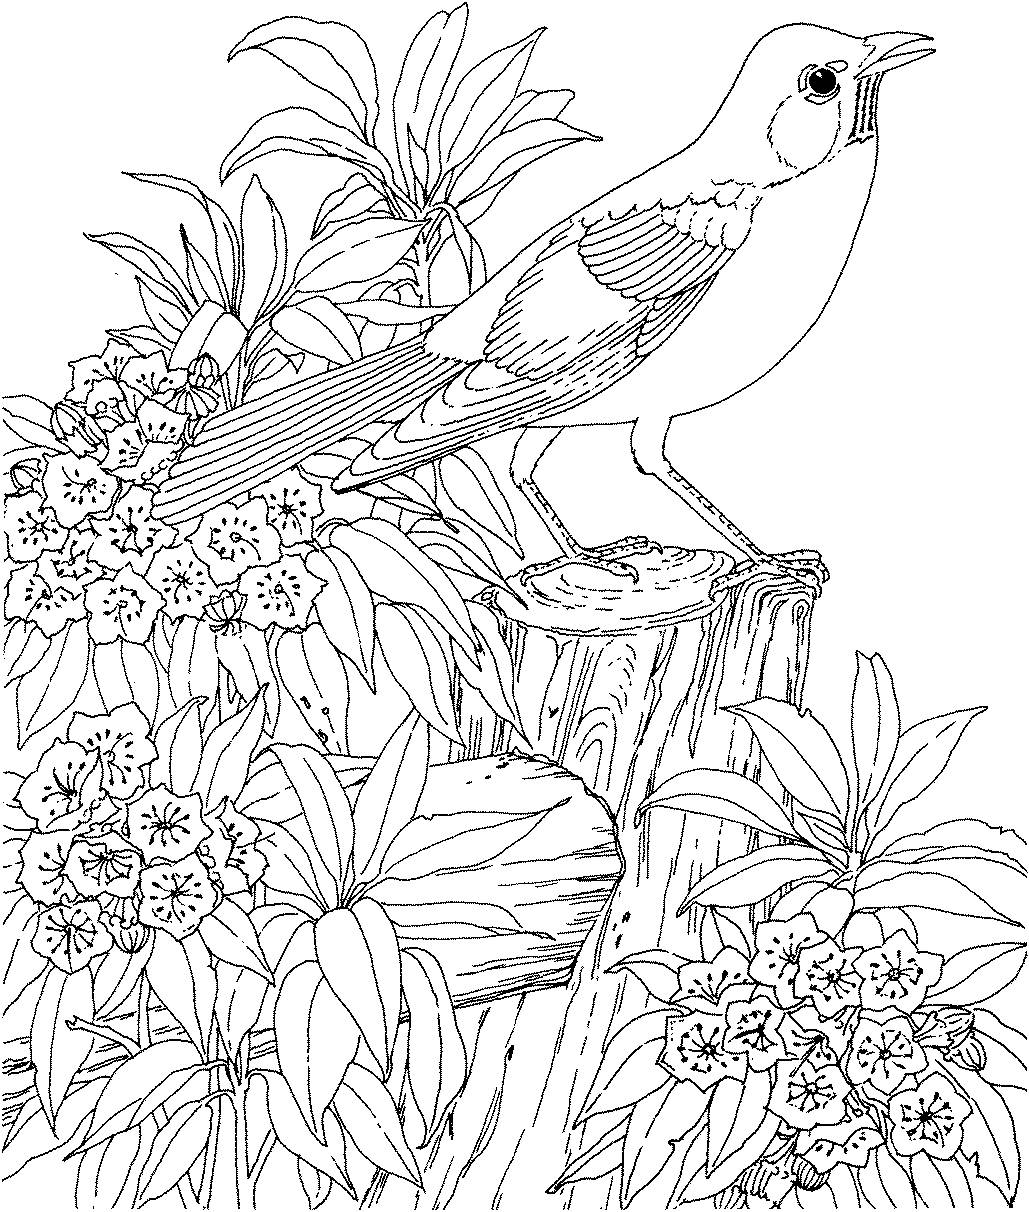 coloring pages for adults - printable coloring pages for adults - adult coloring pages - #12